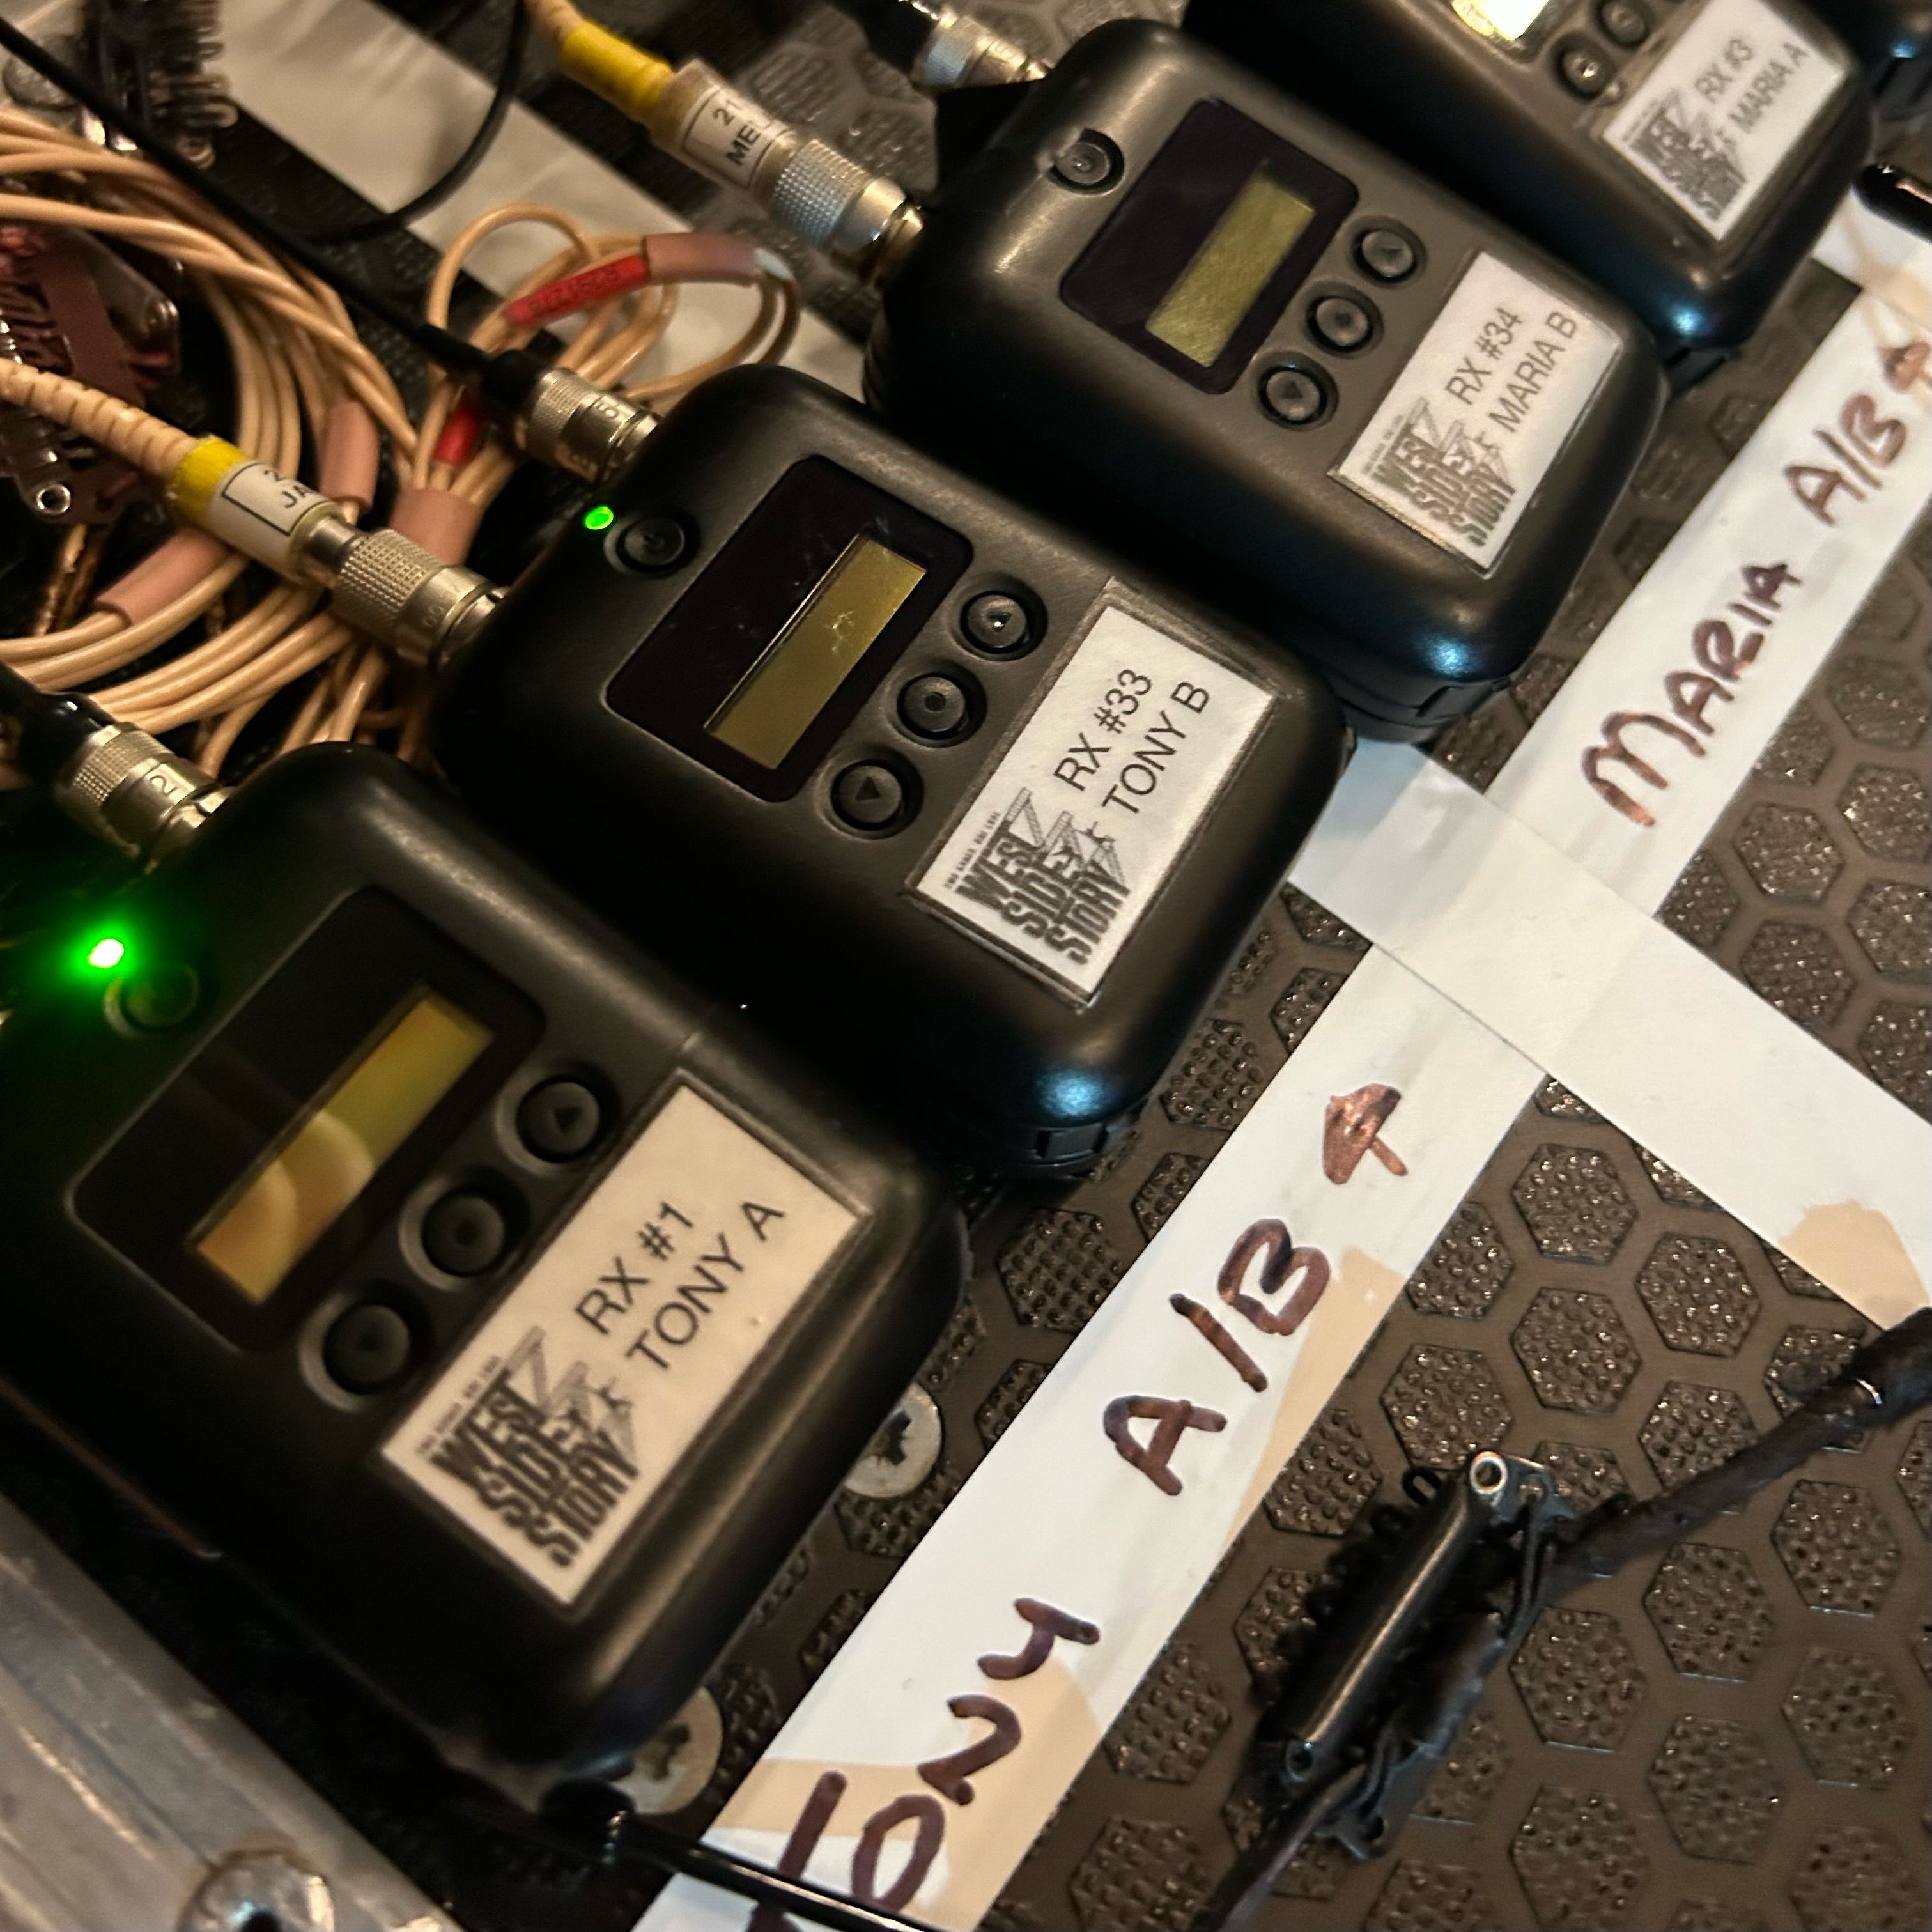 Phil Hurley [Director, Stage Sound Services] considers Sennheiser SK 6212 mini-bodypack transmitters to be a benchmark for advanced digital transmission technology in modern audio productions ​ ​ (Picture courtesy of Aaron Barker)